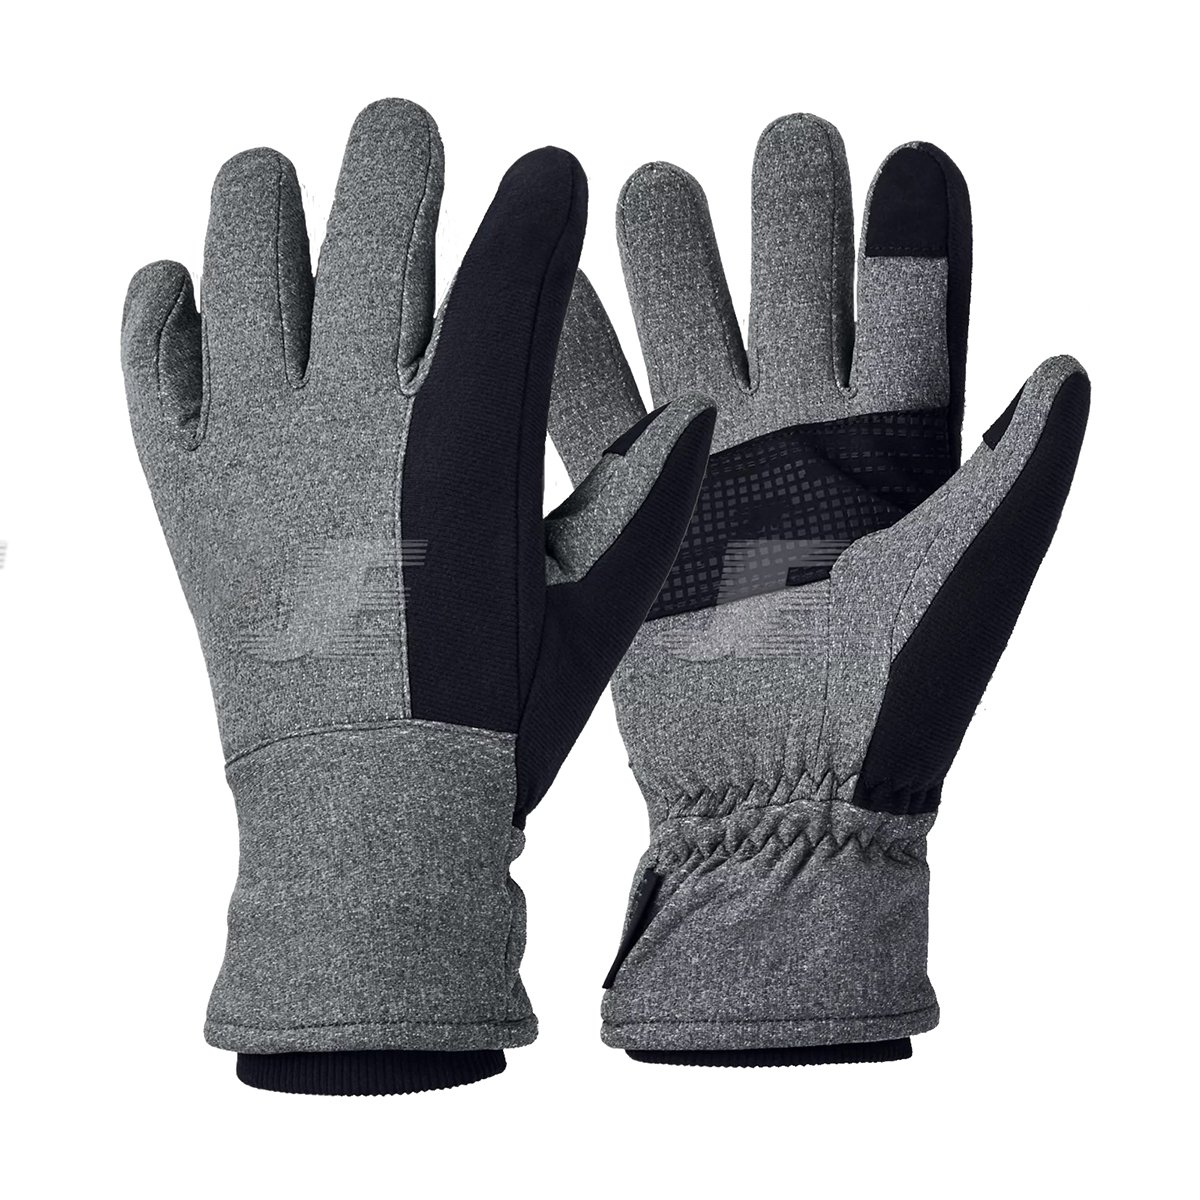 Lined Winter Ridding Waterproof Touchscreen Cycling Gloves